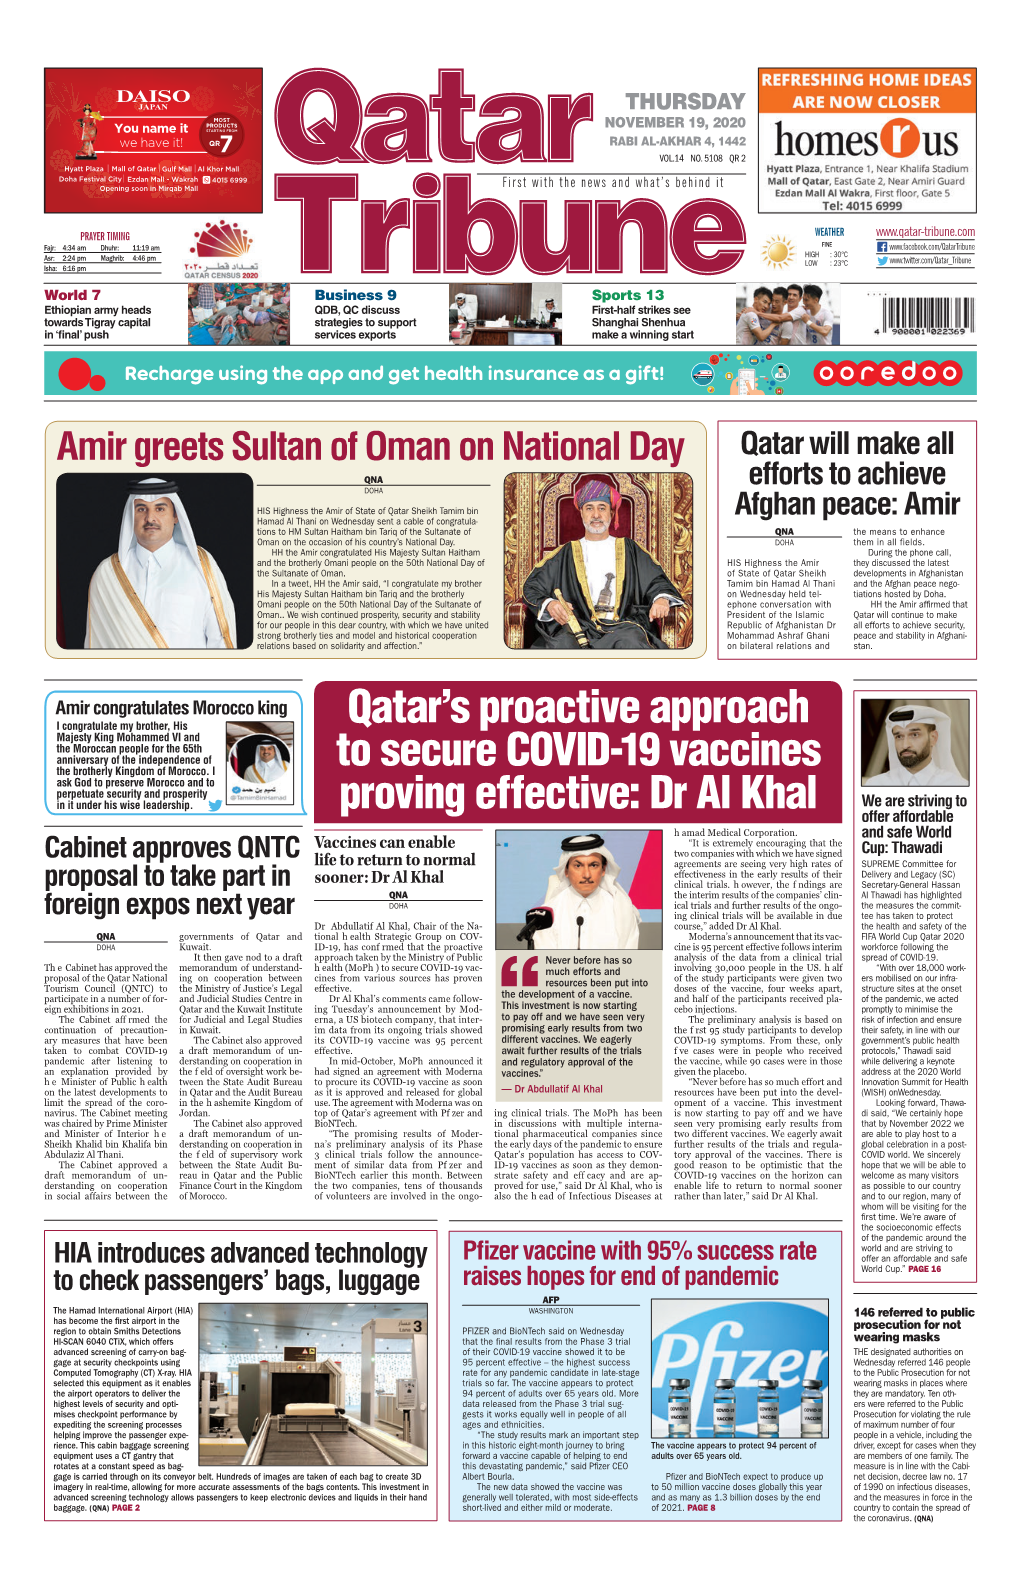 Qatar's Proactive Approach to Secure COVID-19 Vaccines Proving Effective: Dr Al Khal